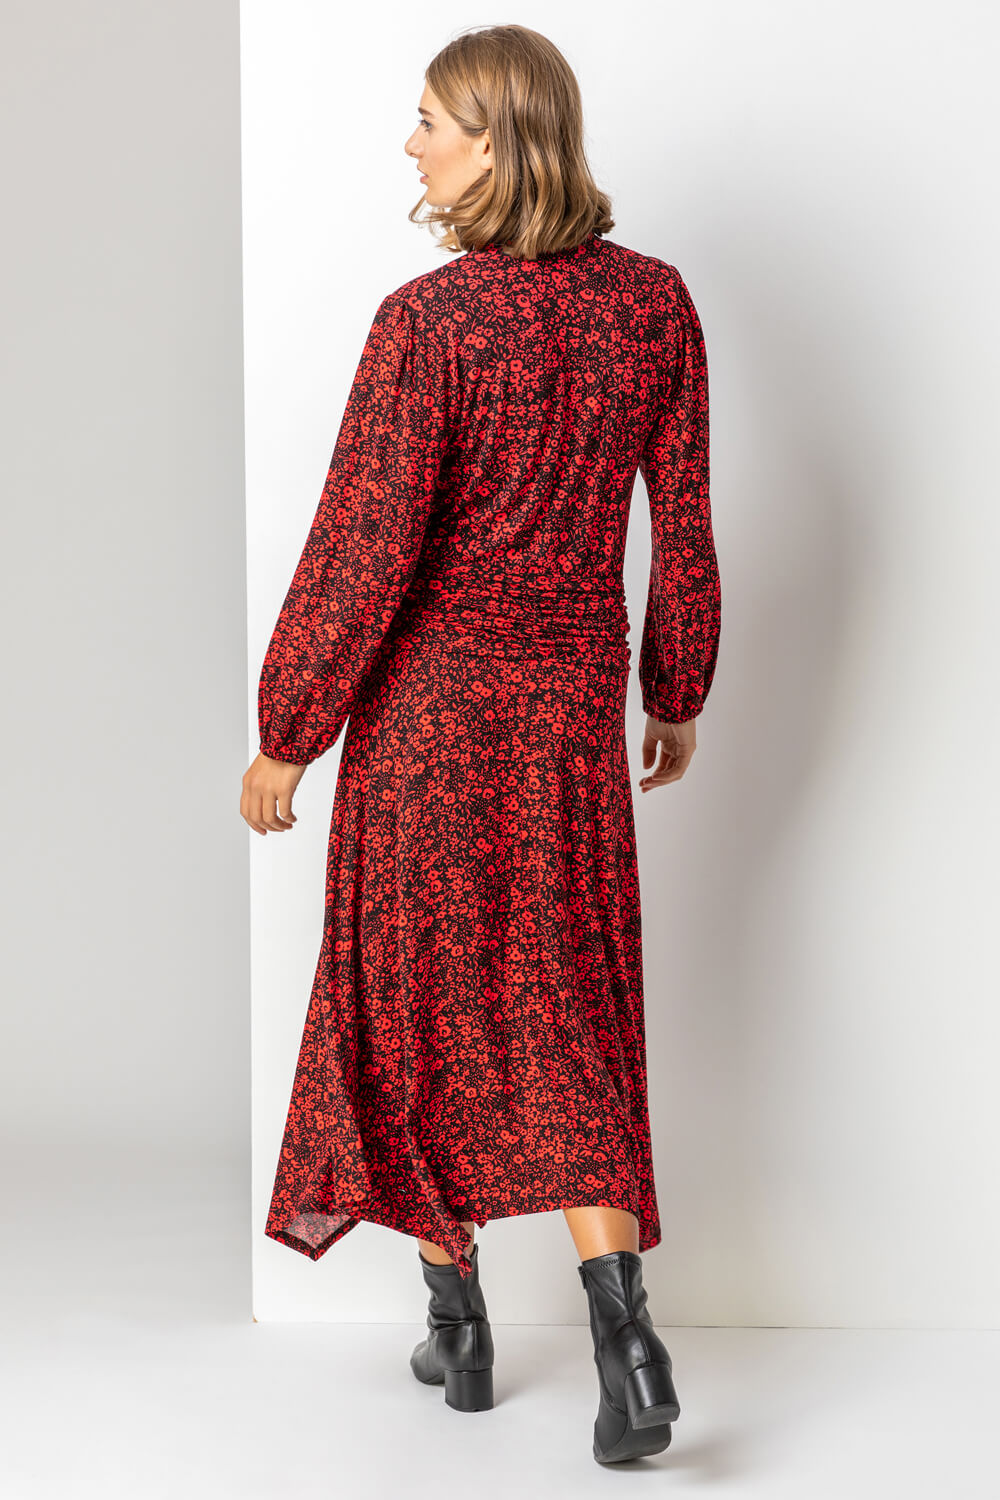 Red Floral Print Pleat Detail Midi Dress, Image 2 of 4